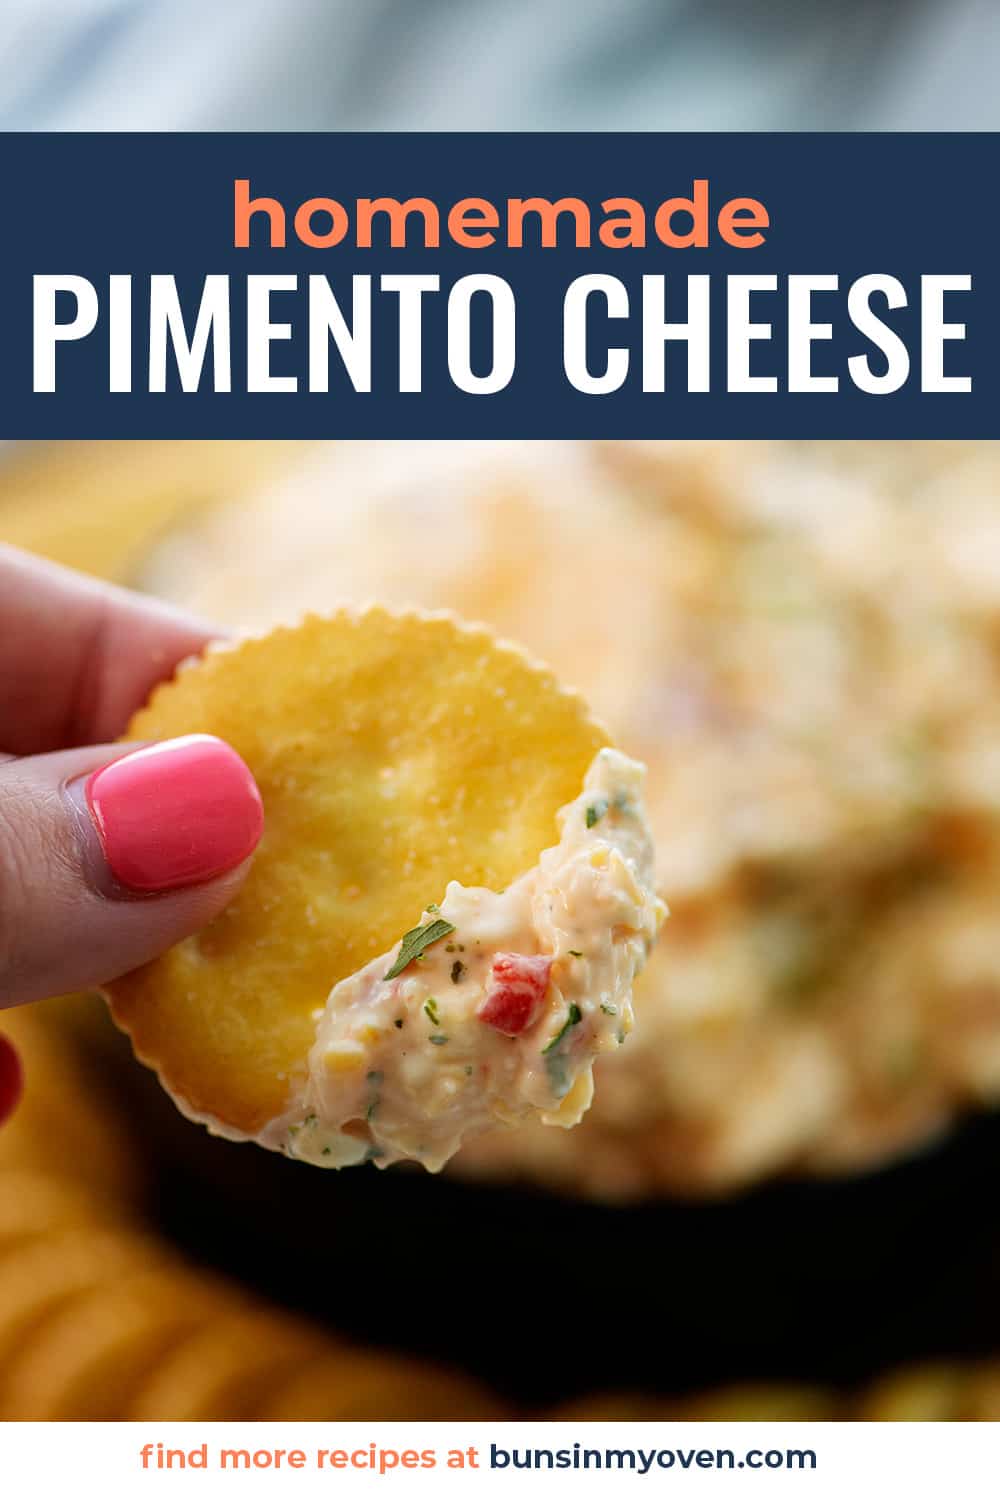 hand holding a cracker spread with pimento cheese.